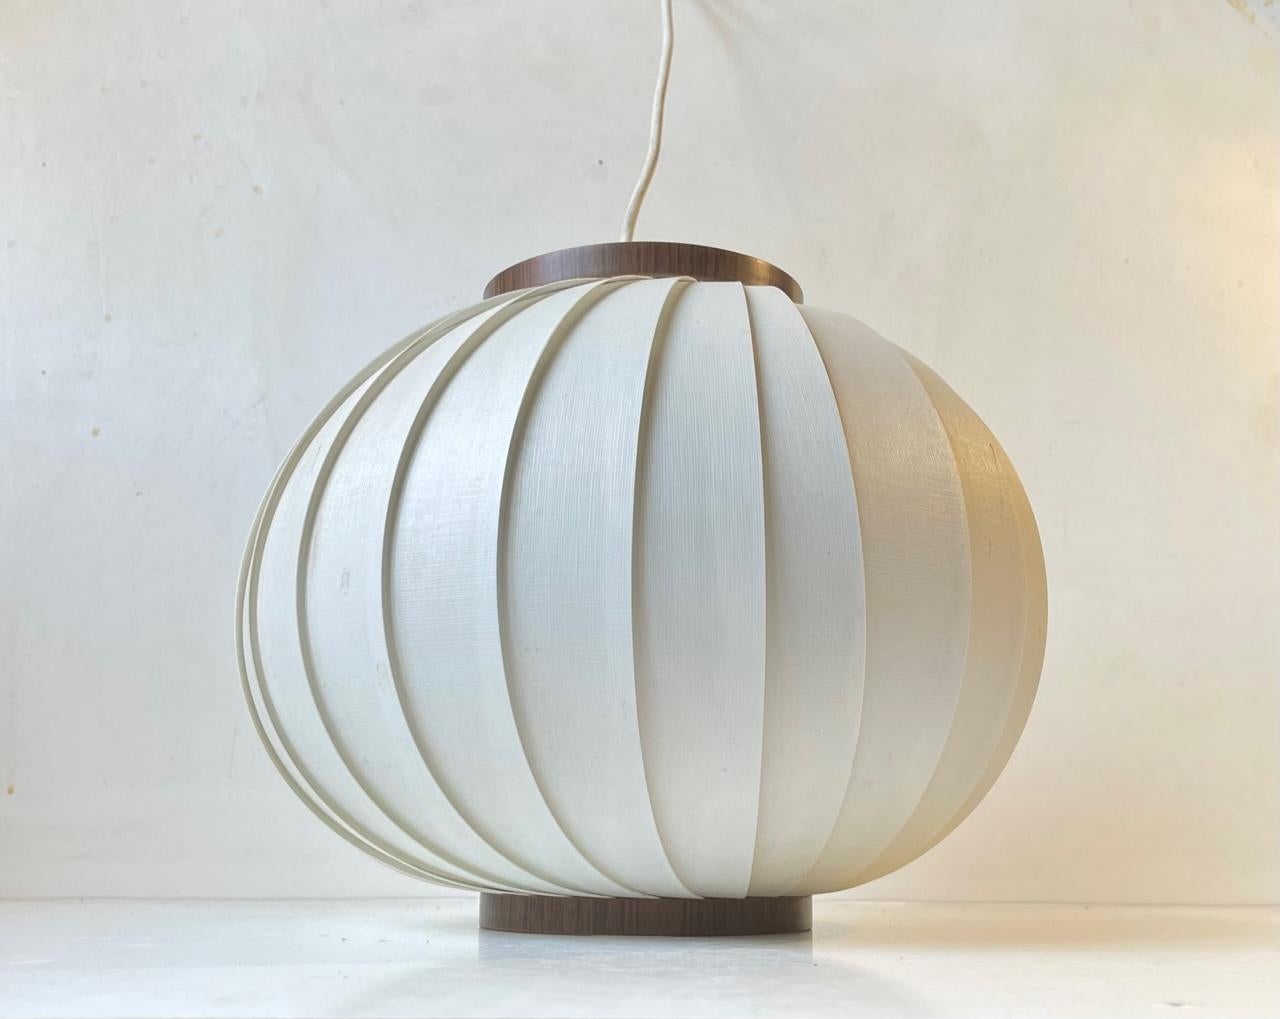 Simplistically composed white crylic pendant lamp called Bojan or Beehive. This is the larger version and it was designed by Lars E. Schiøler and manufactured by Høyrup in Denmark during the 1960s. Similar designs surfaced from Le Klint and Heifetz